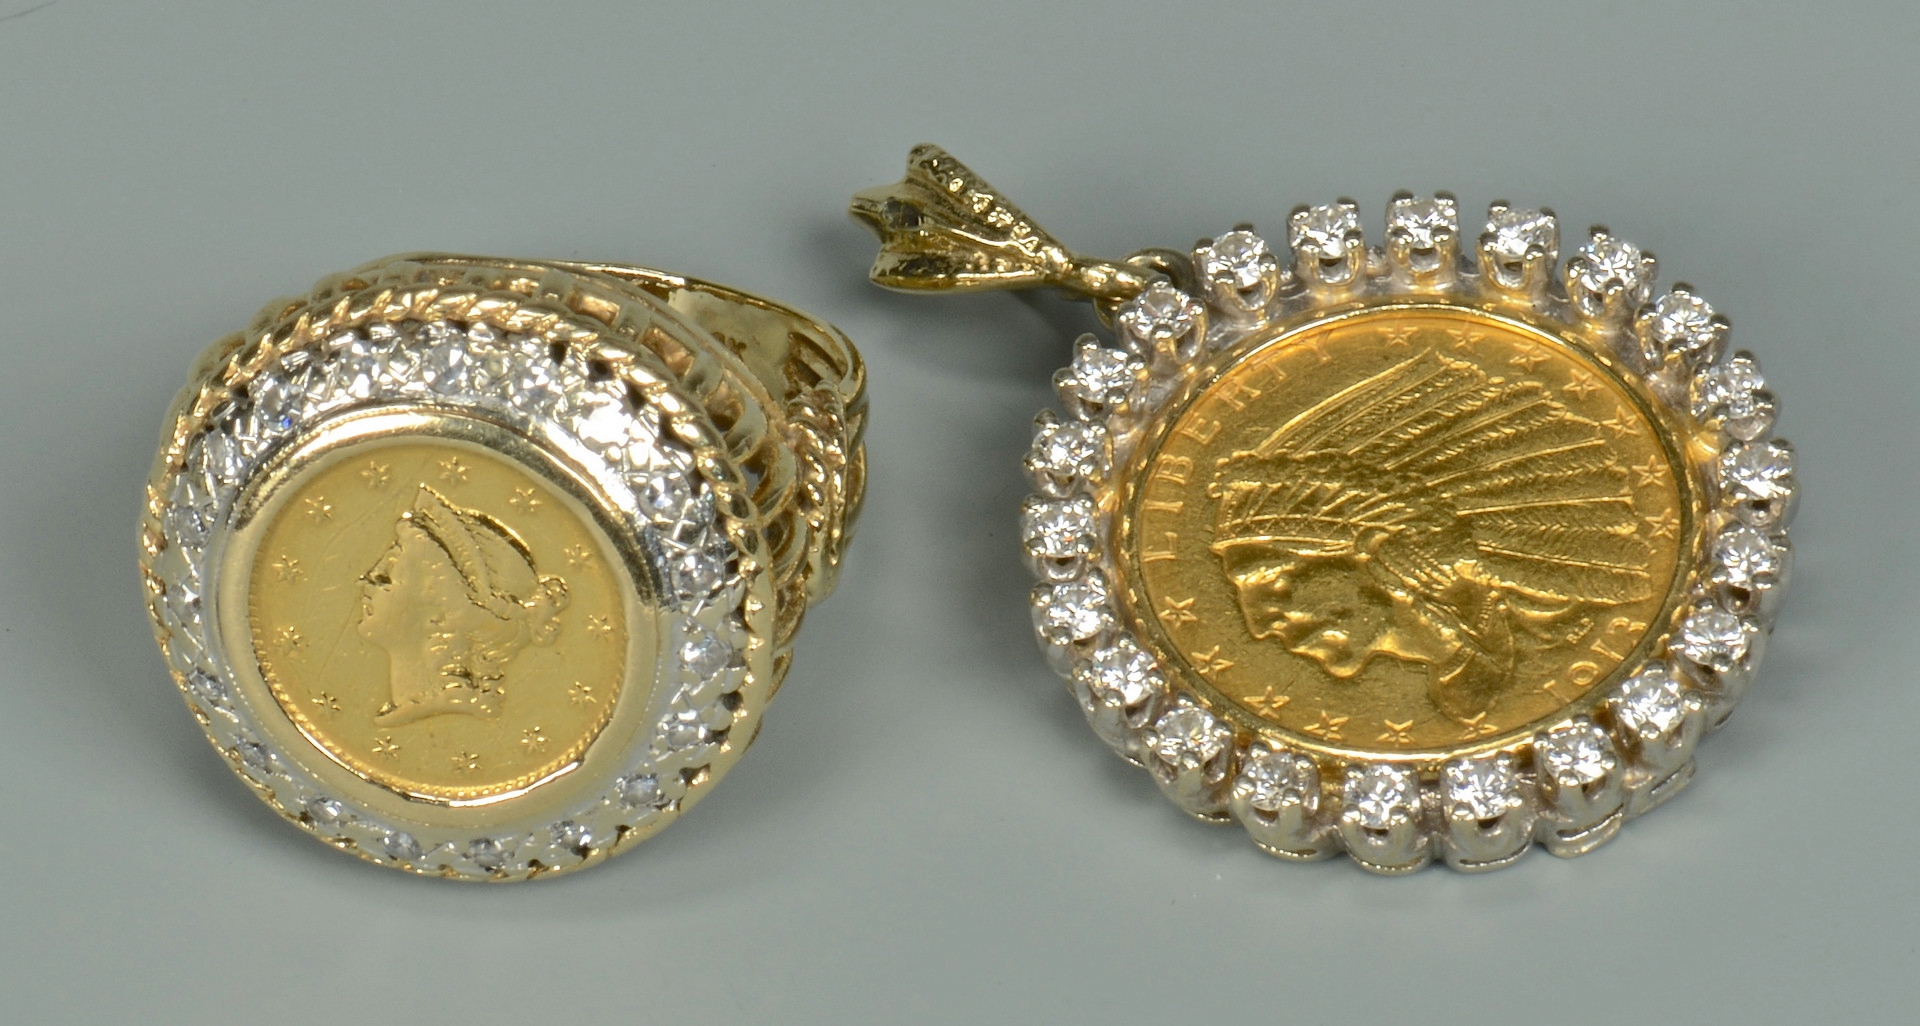 Lot 582: 2 Mounted Gold Coins w/ Diamond Surrounds